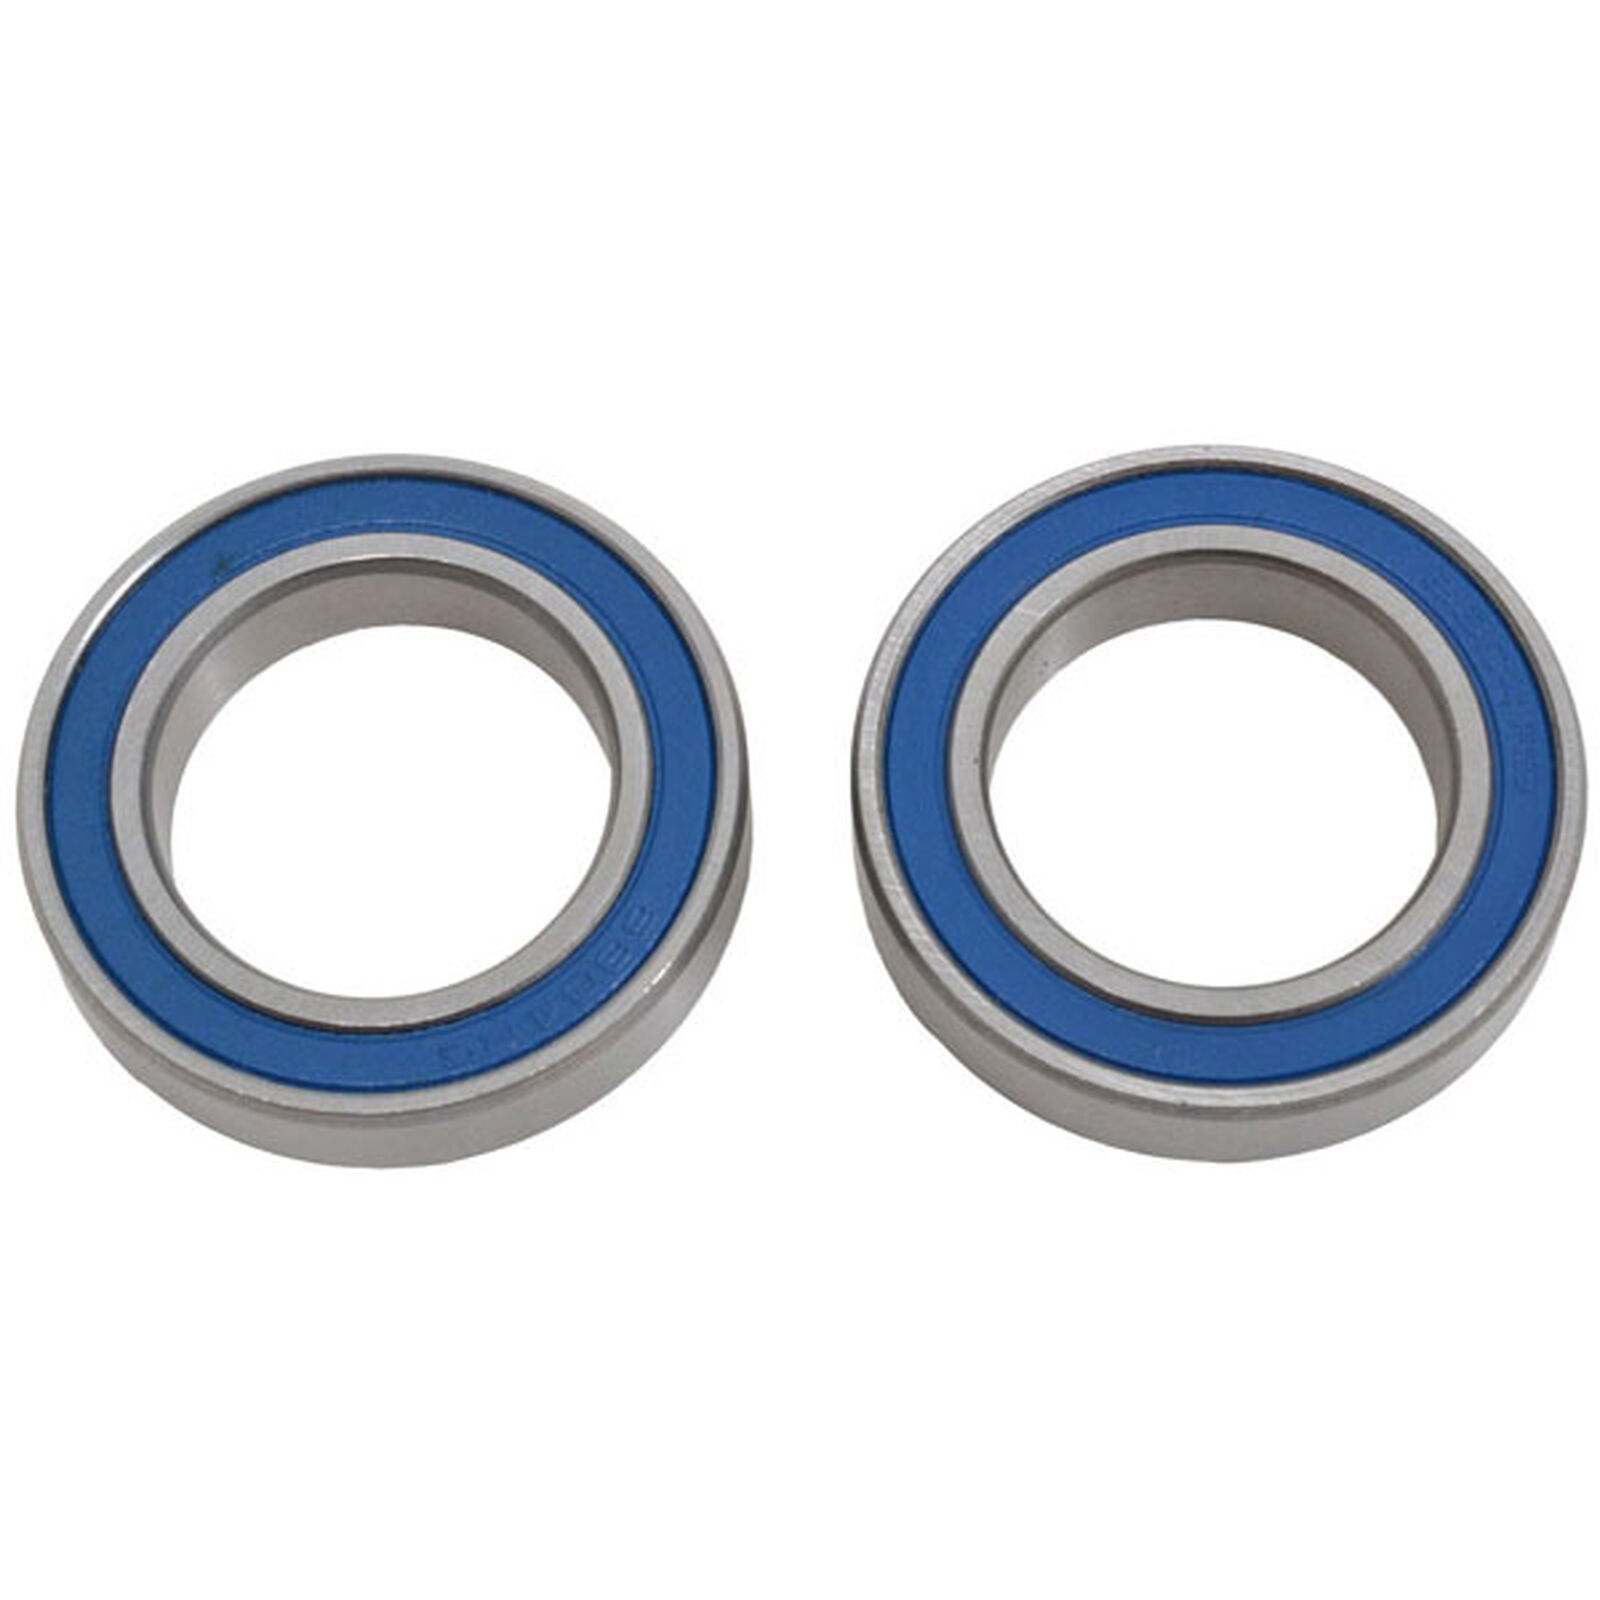 Replacement Oversized Inner Bearing (2): Rear Carriers X-Maxx